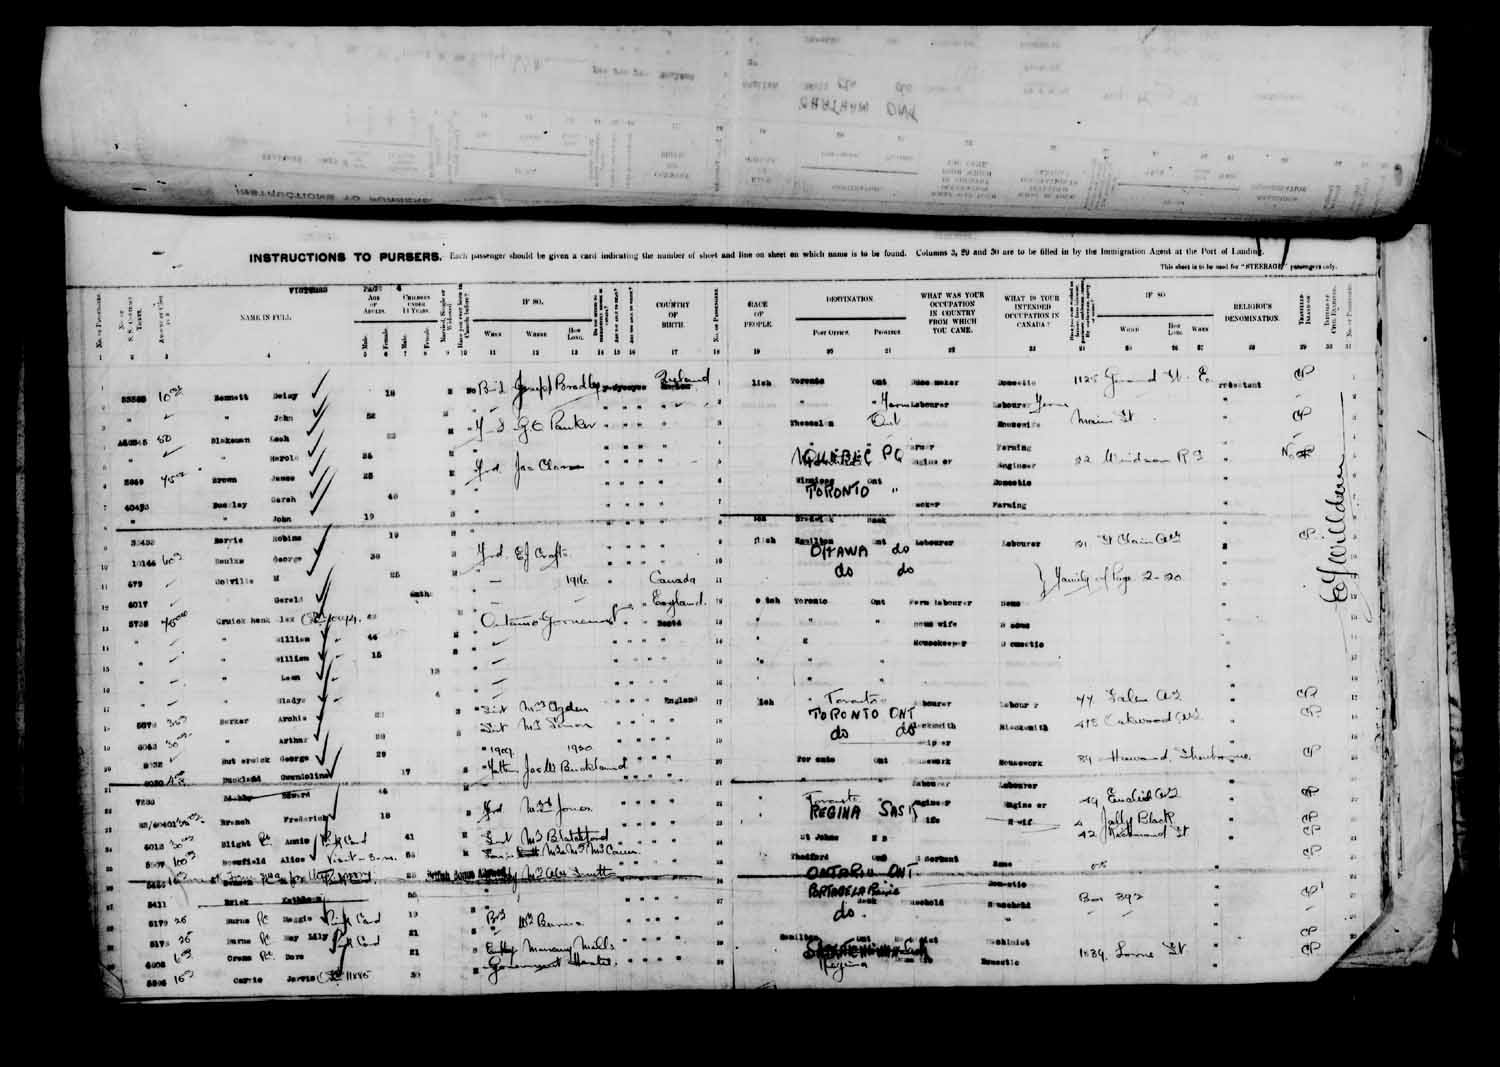 Digitized page of Passenger Lists for Image No.: e003610644